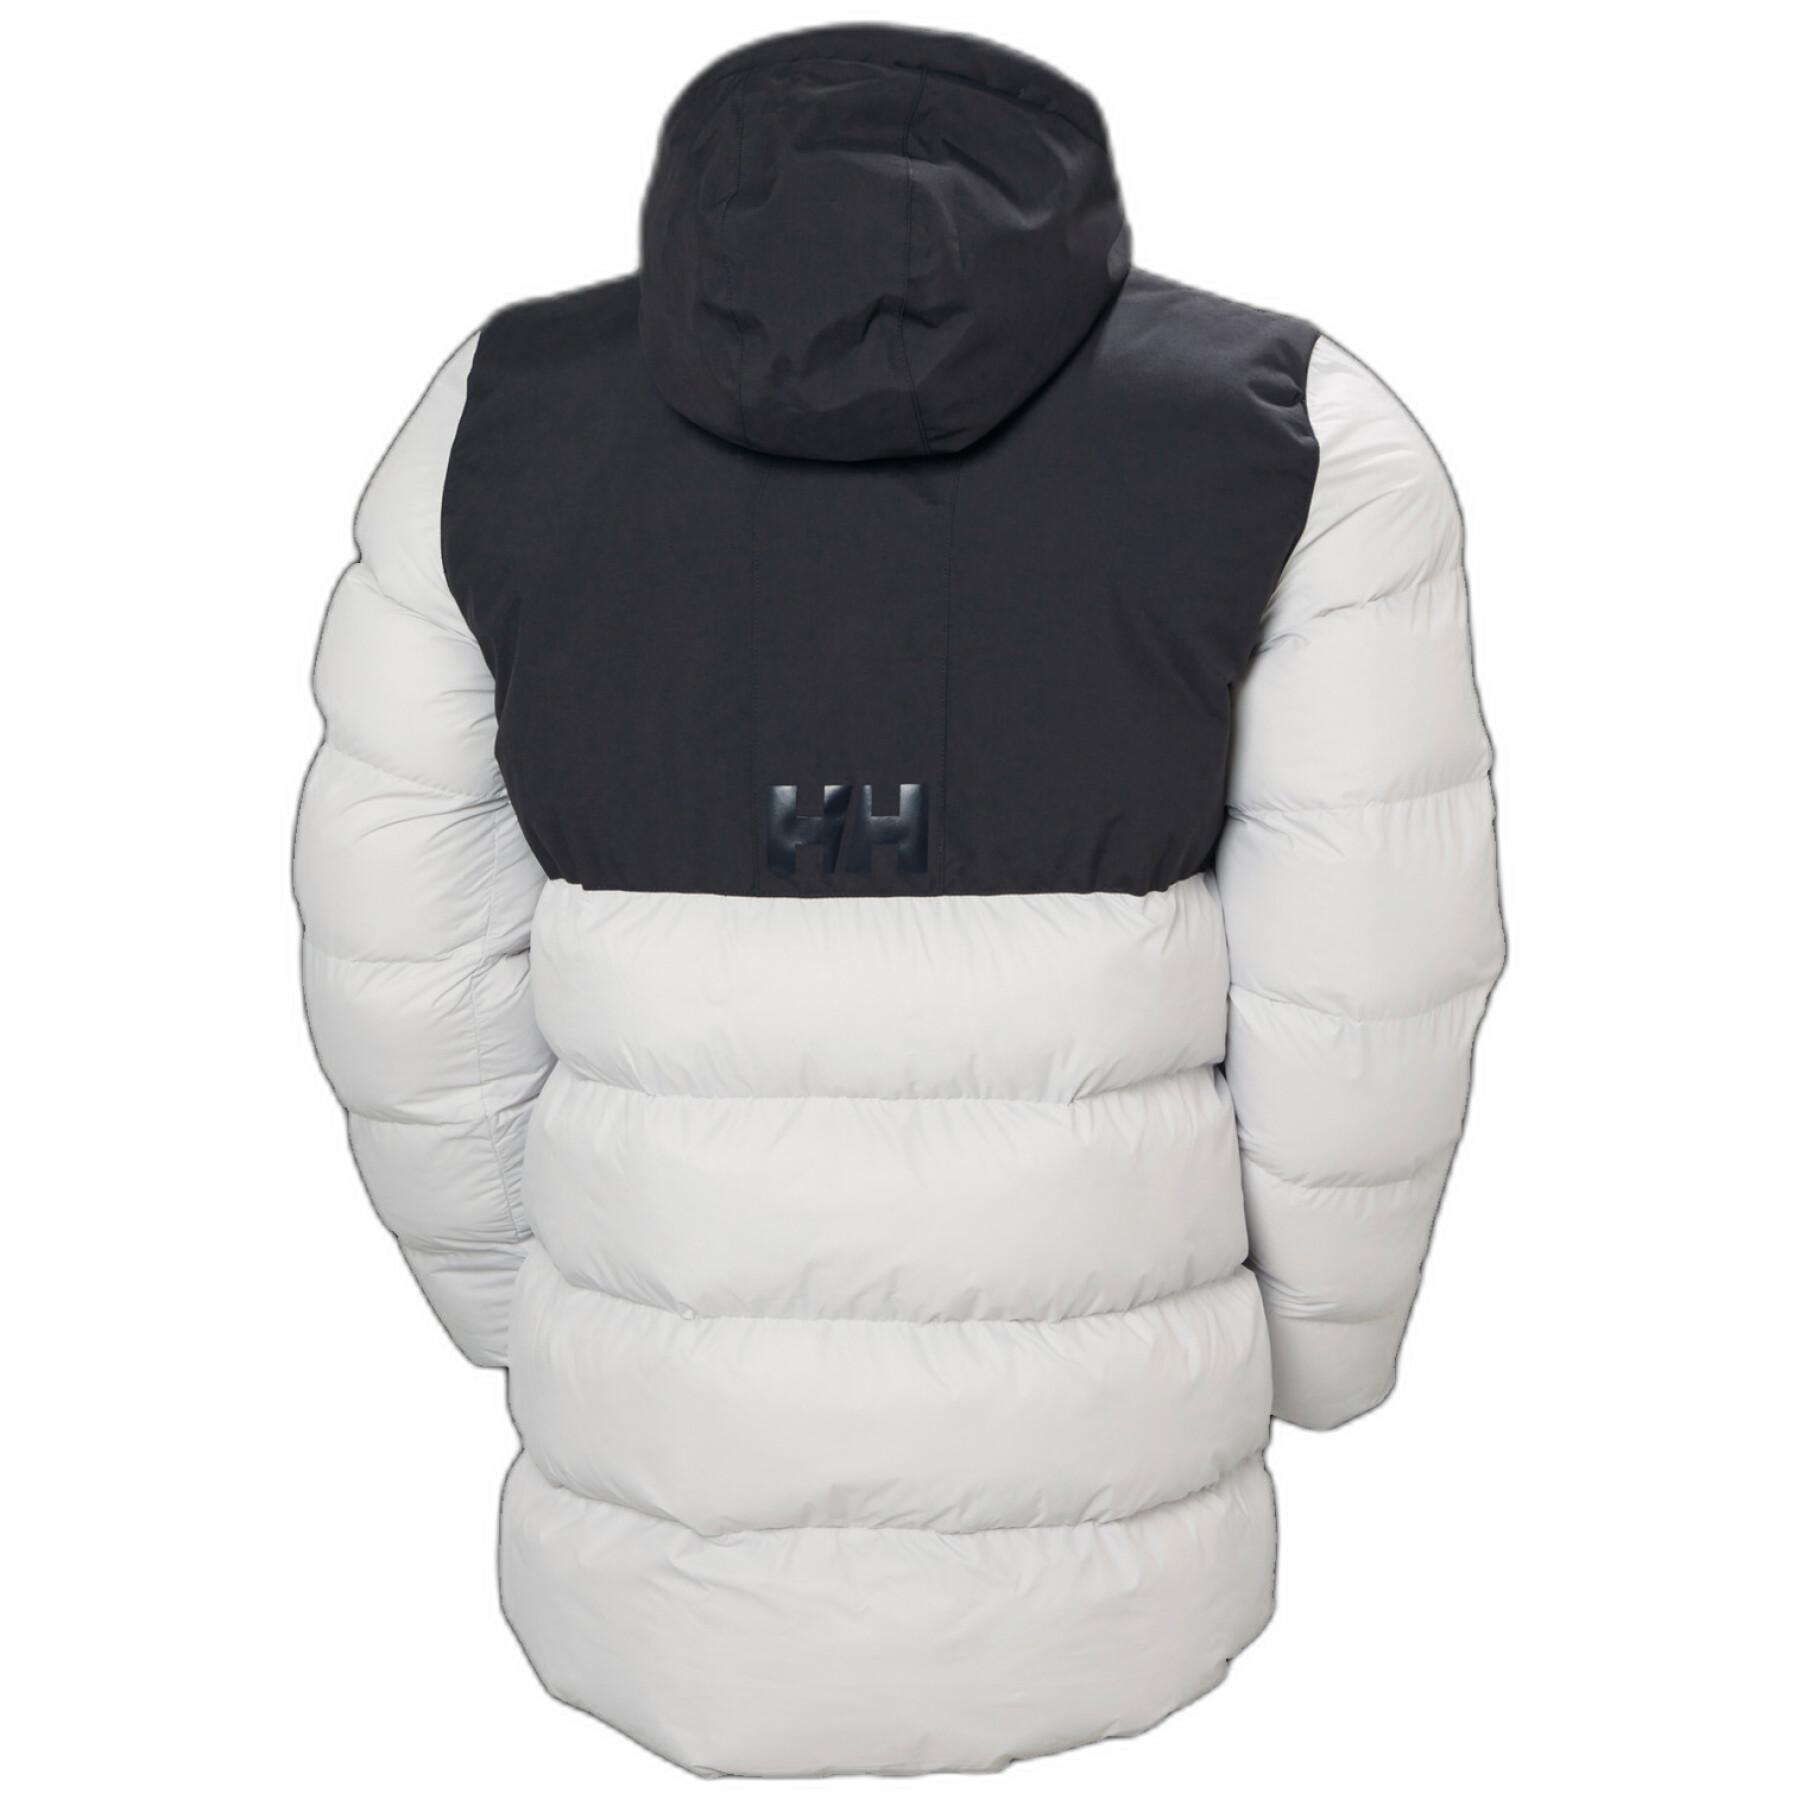 Giacca Helly Hansen active puffy long